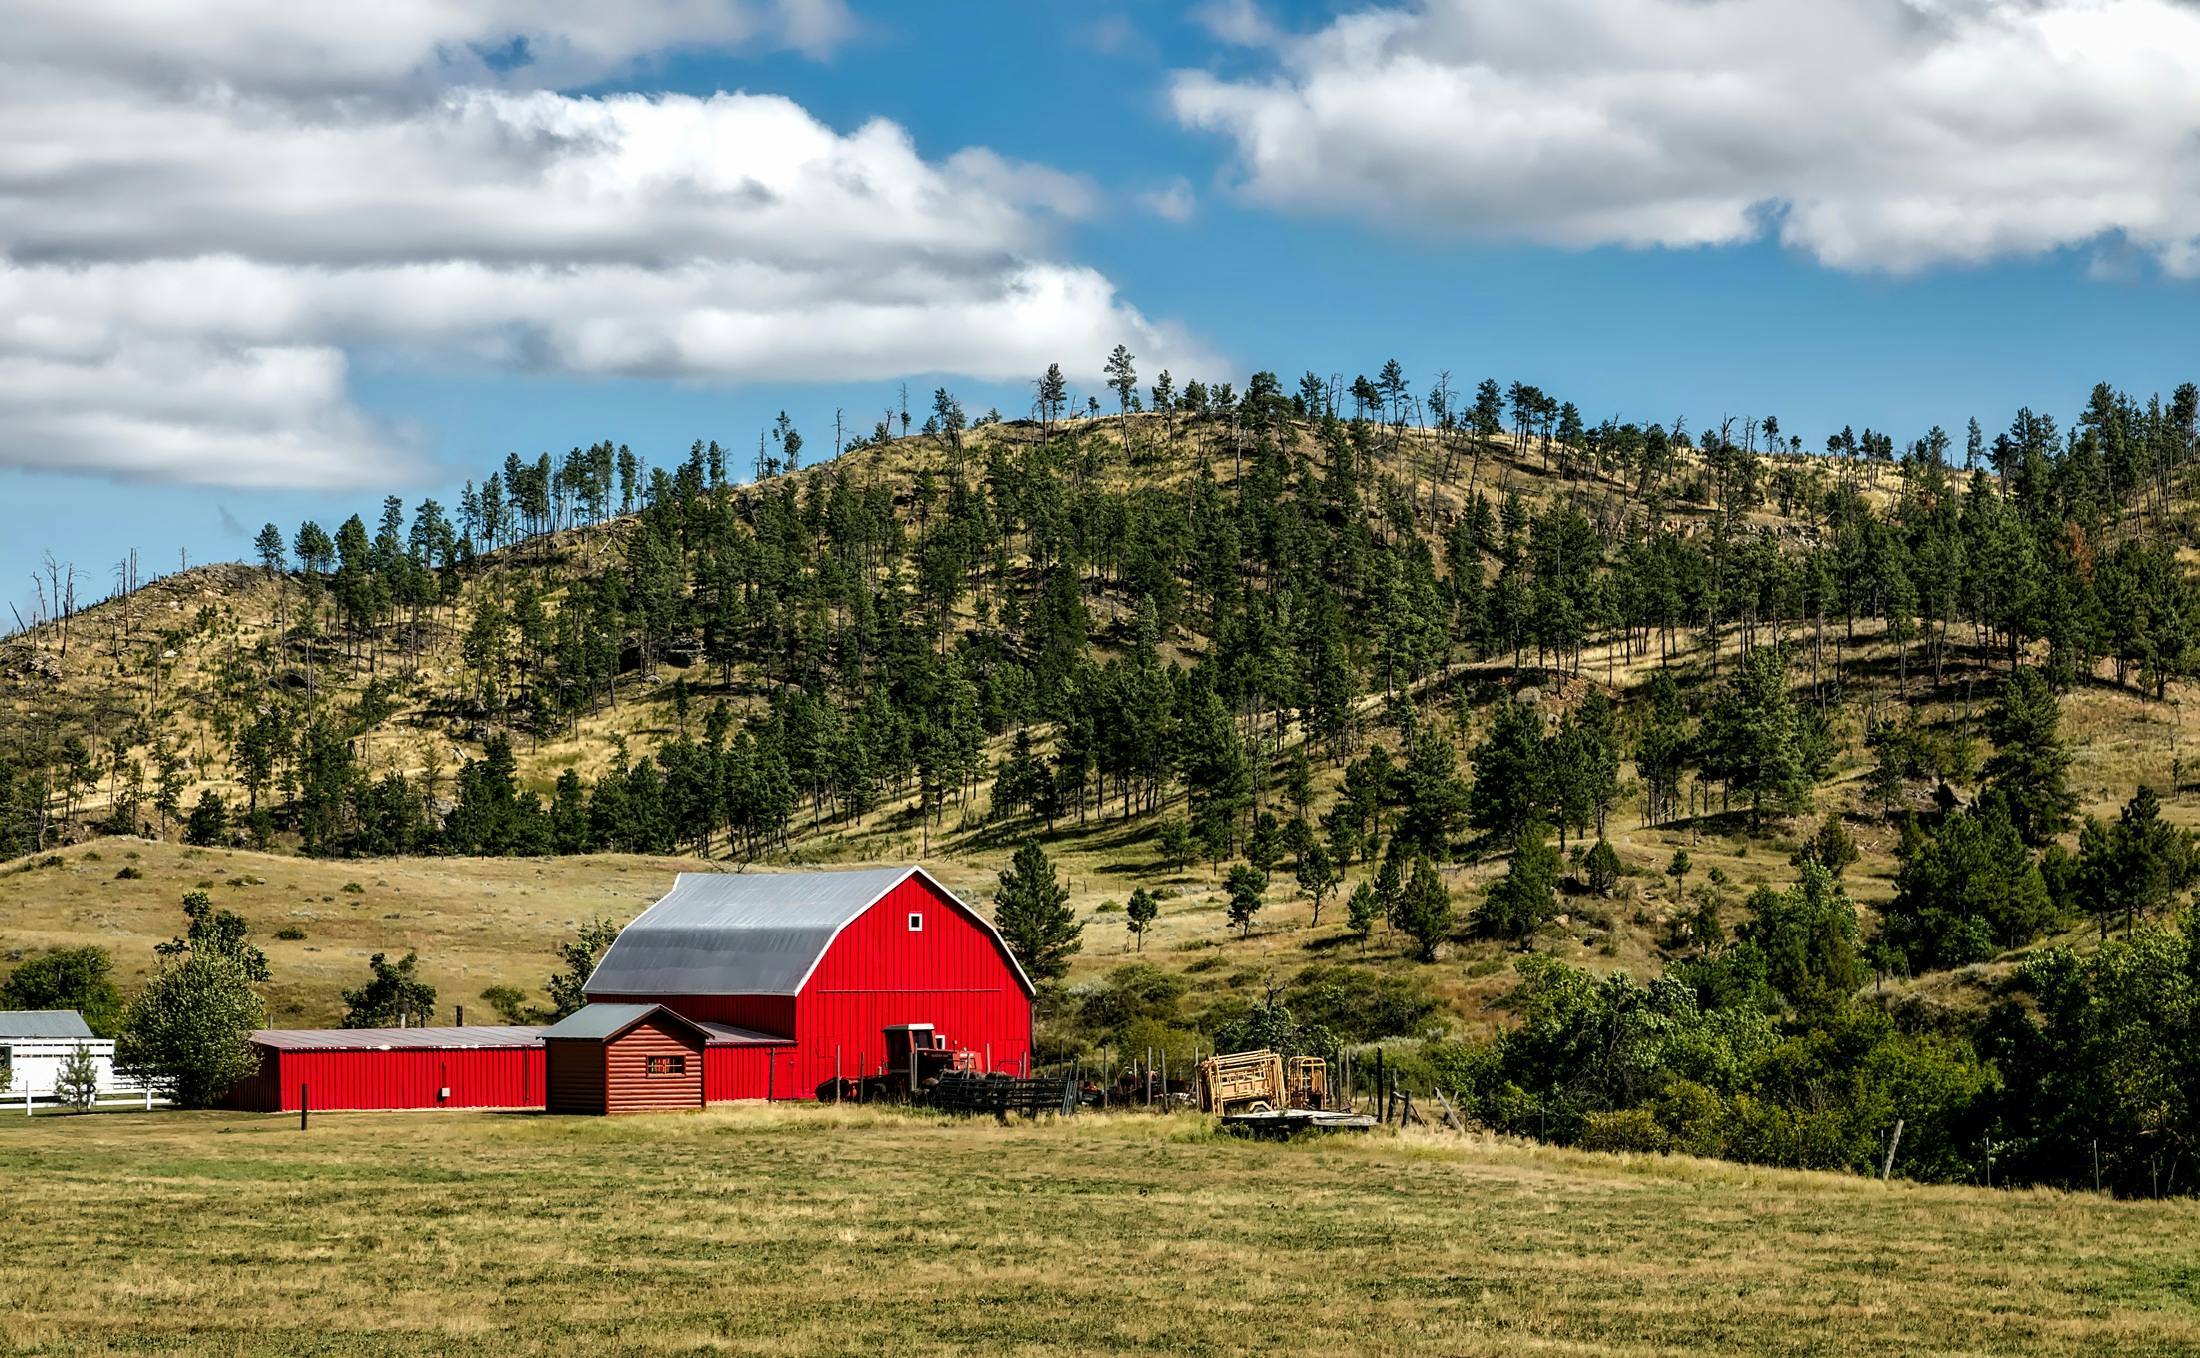 107400 Cattle Ranch Stock Photos Pictures  RoyaltyFree Images  iStock   Texas cattle ranch Cattle ranch usa Cattle ranch montana